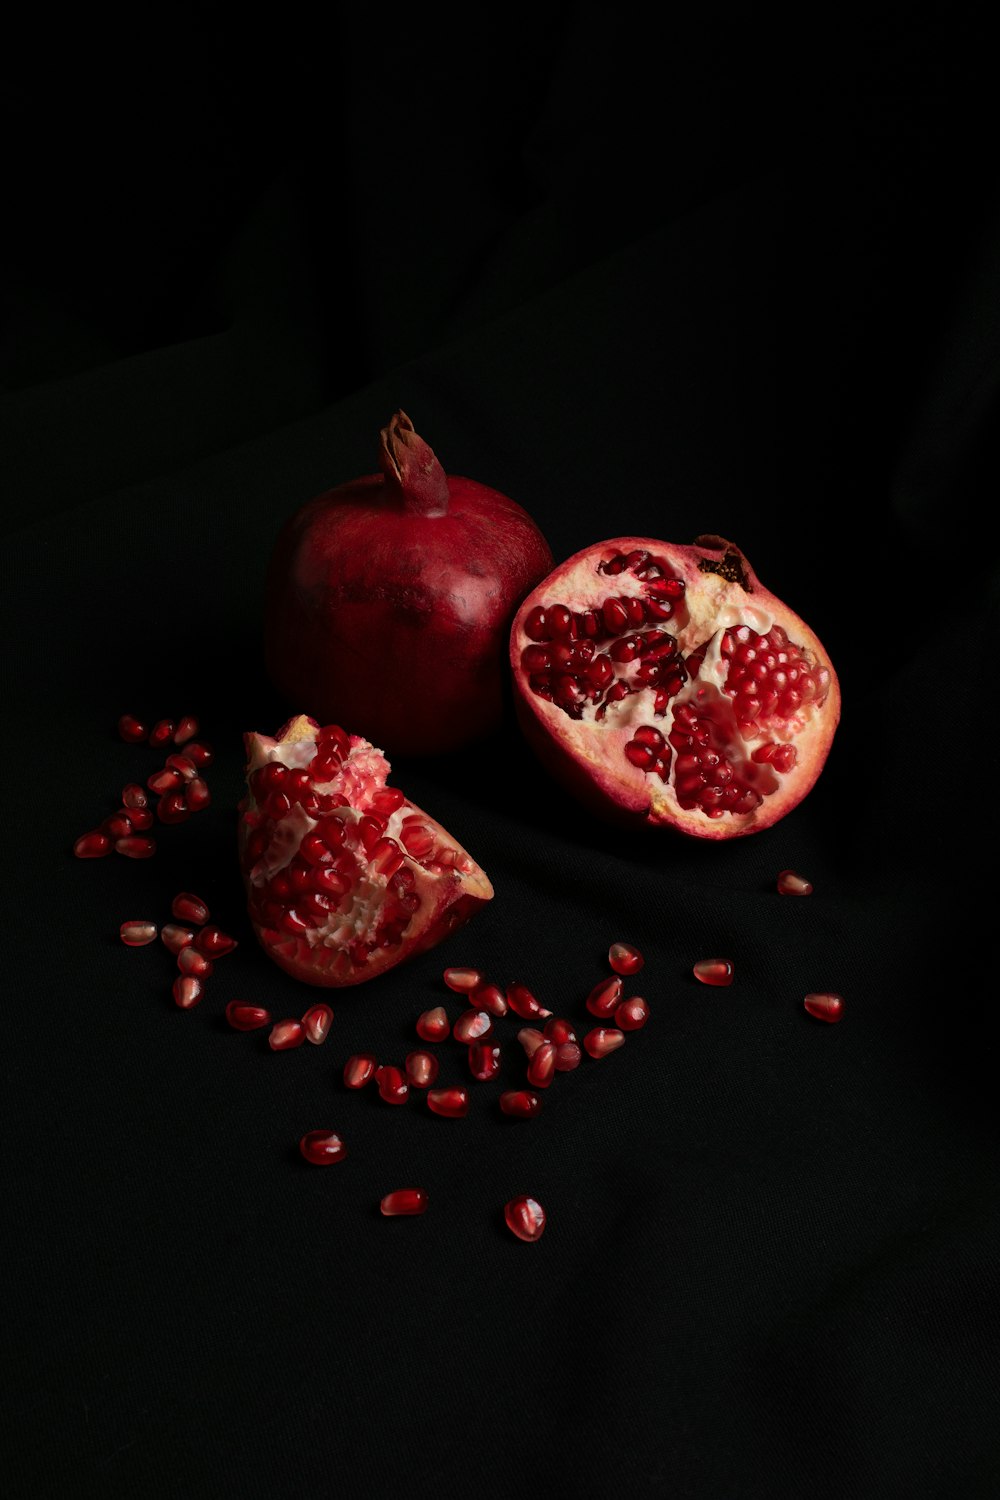 red pomegranate